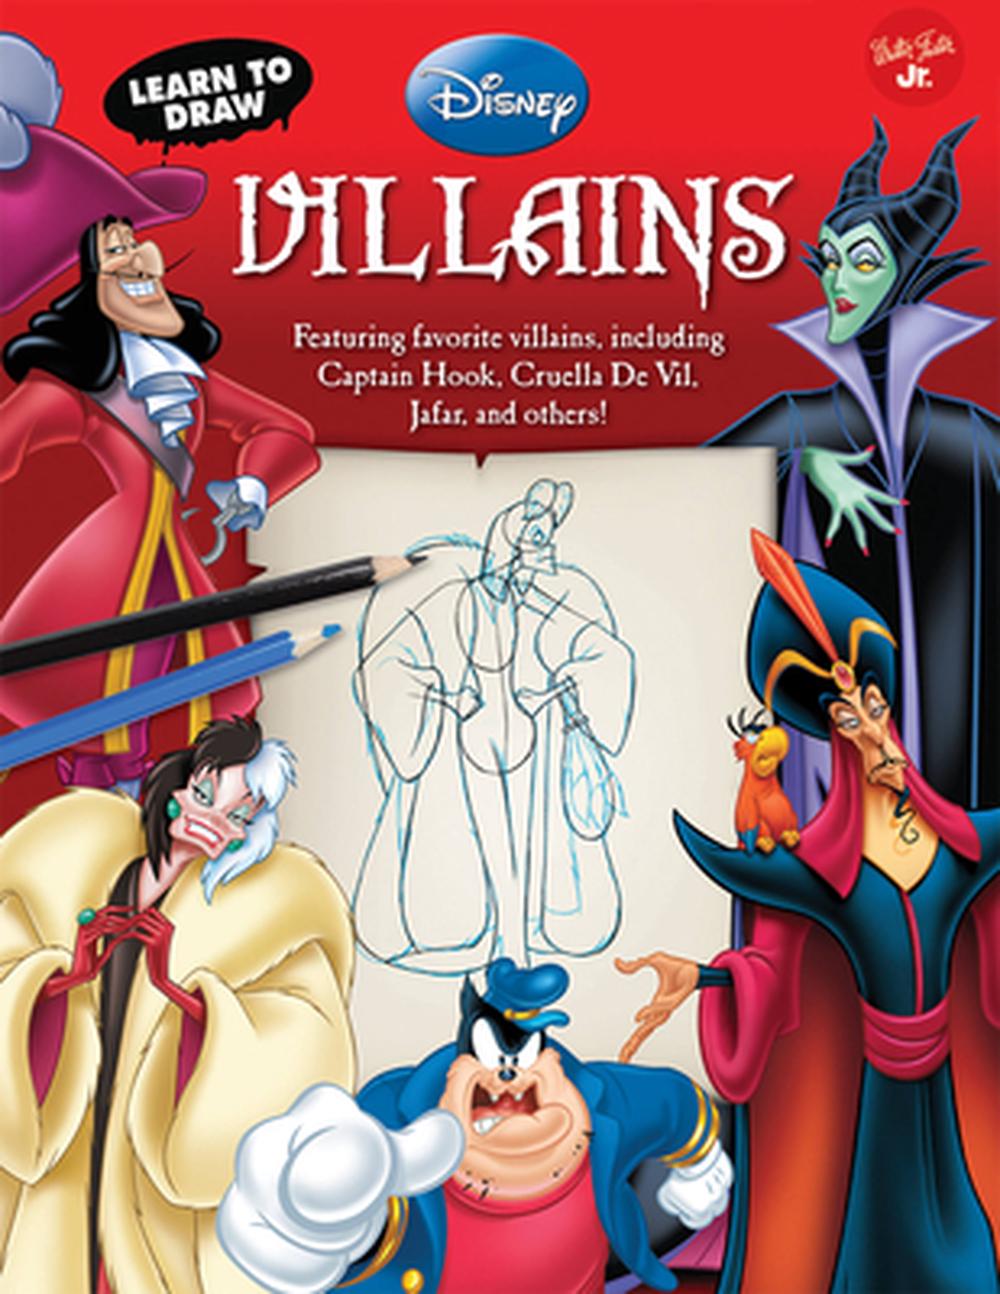 Learn to Draw Disney Villains (English) Paperback Book Free Shipping